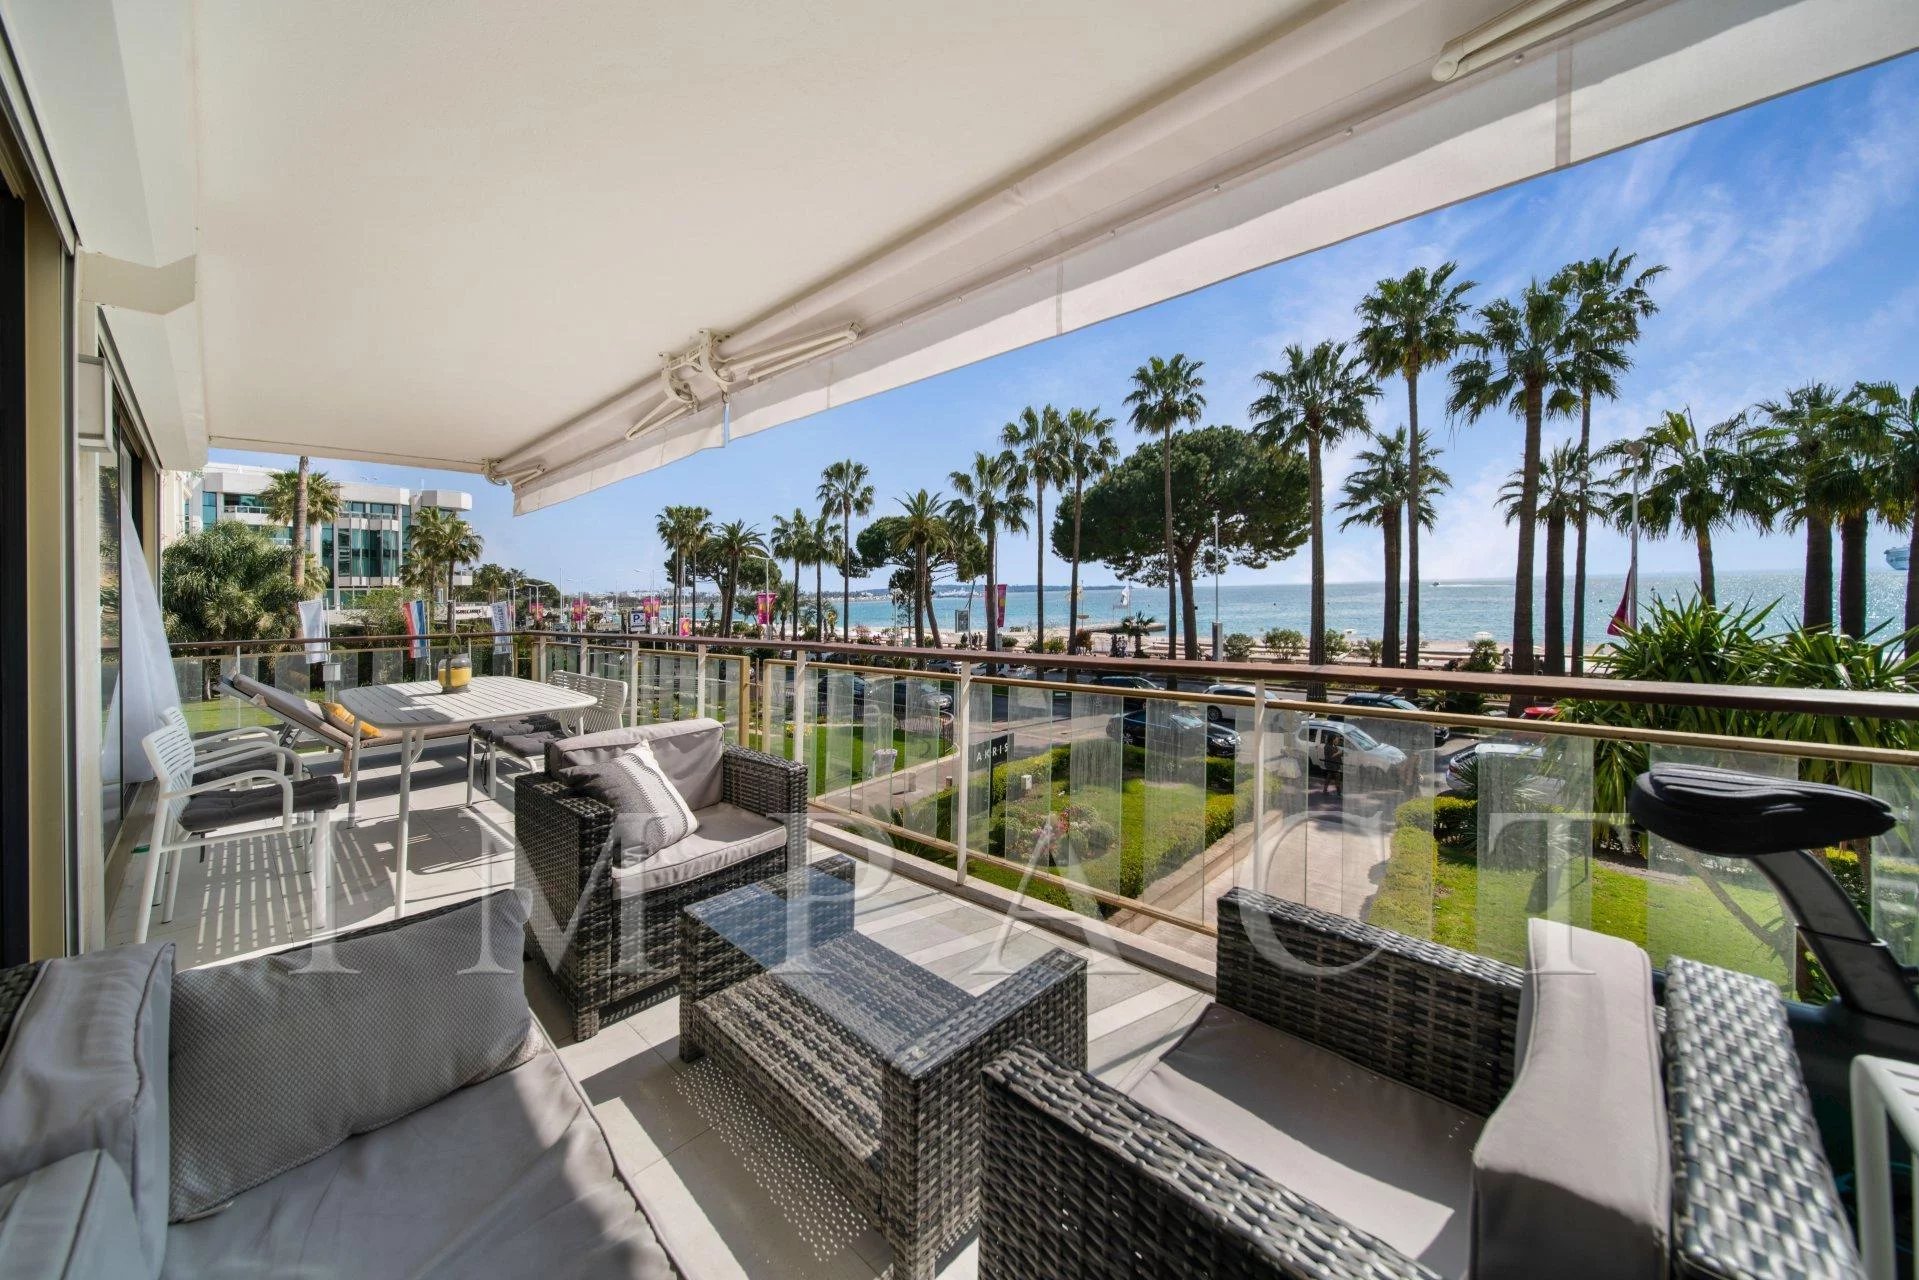 2-bedrooms apartment to rent in the Grand Hotel, panoramic sea view, , Cannes